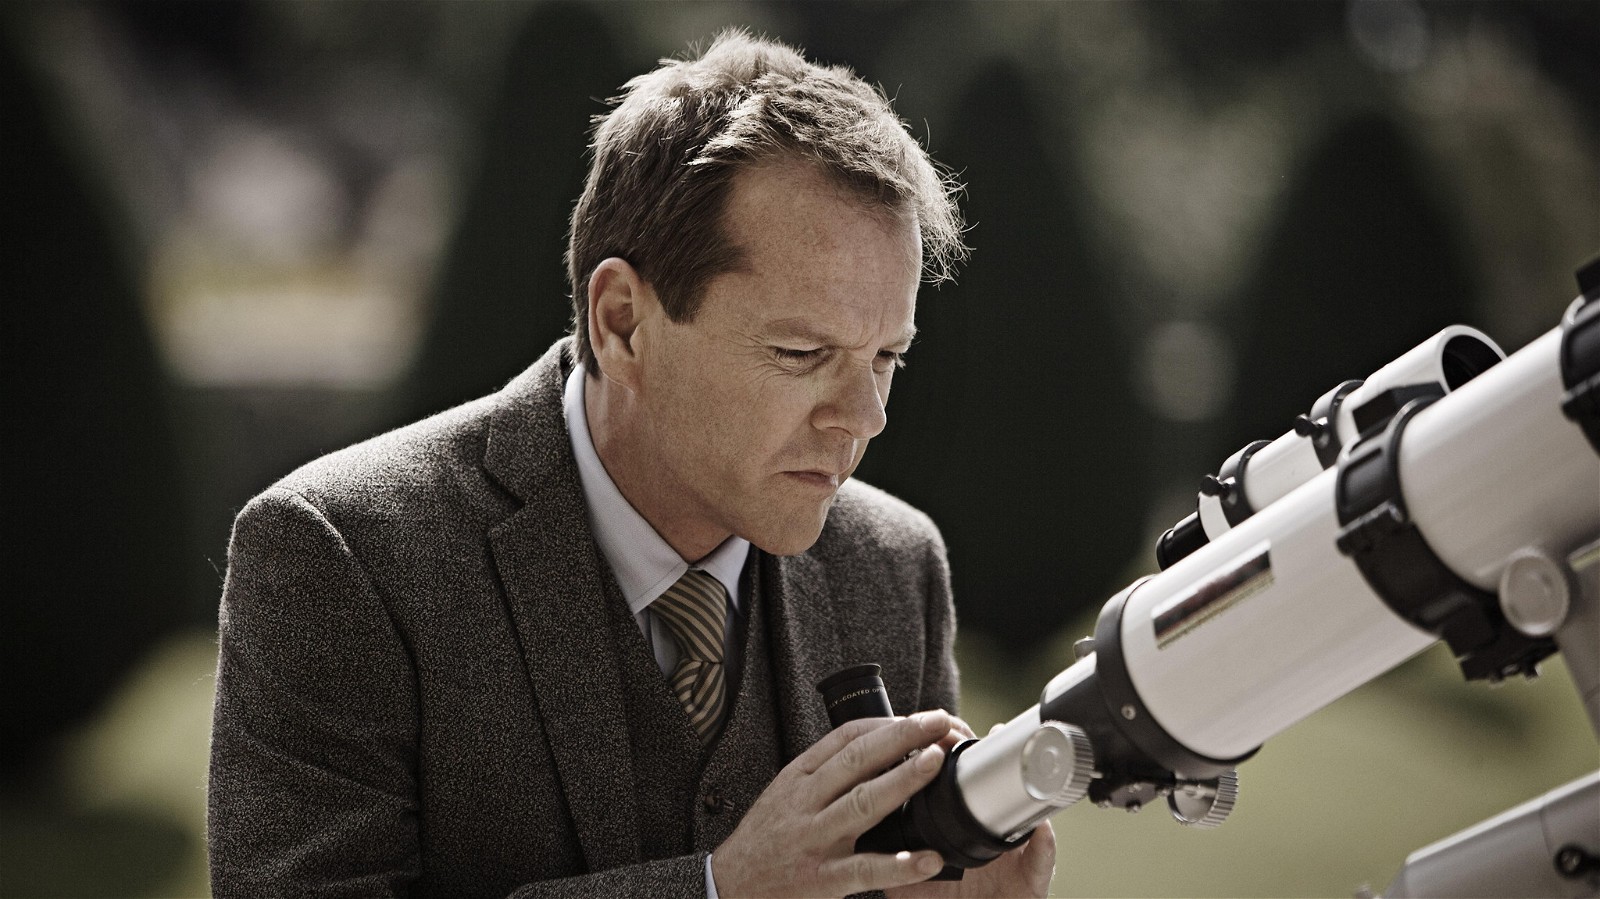 Kiefer Sutherland has starred in many acclaimed films such as 2011's Melancholia | Zentropa Entertainment